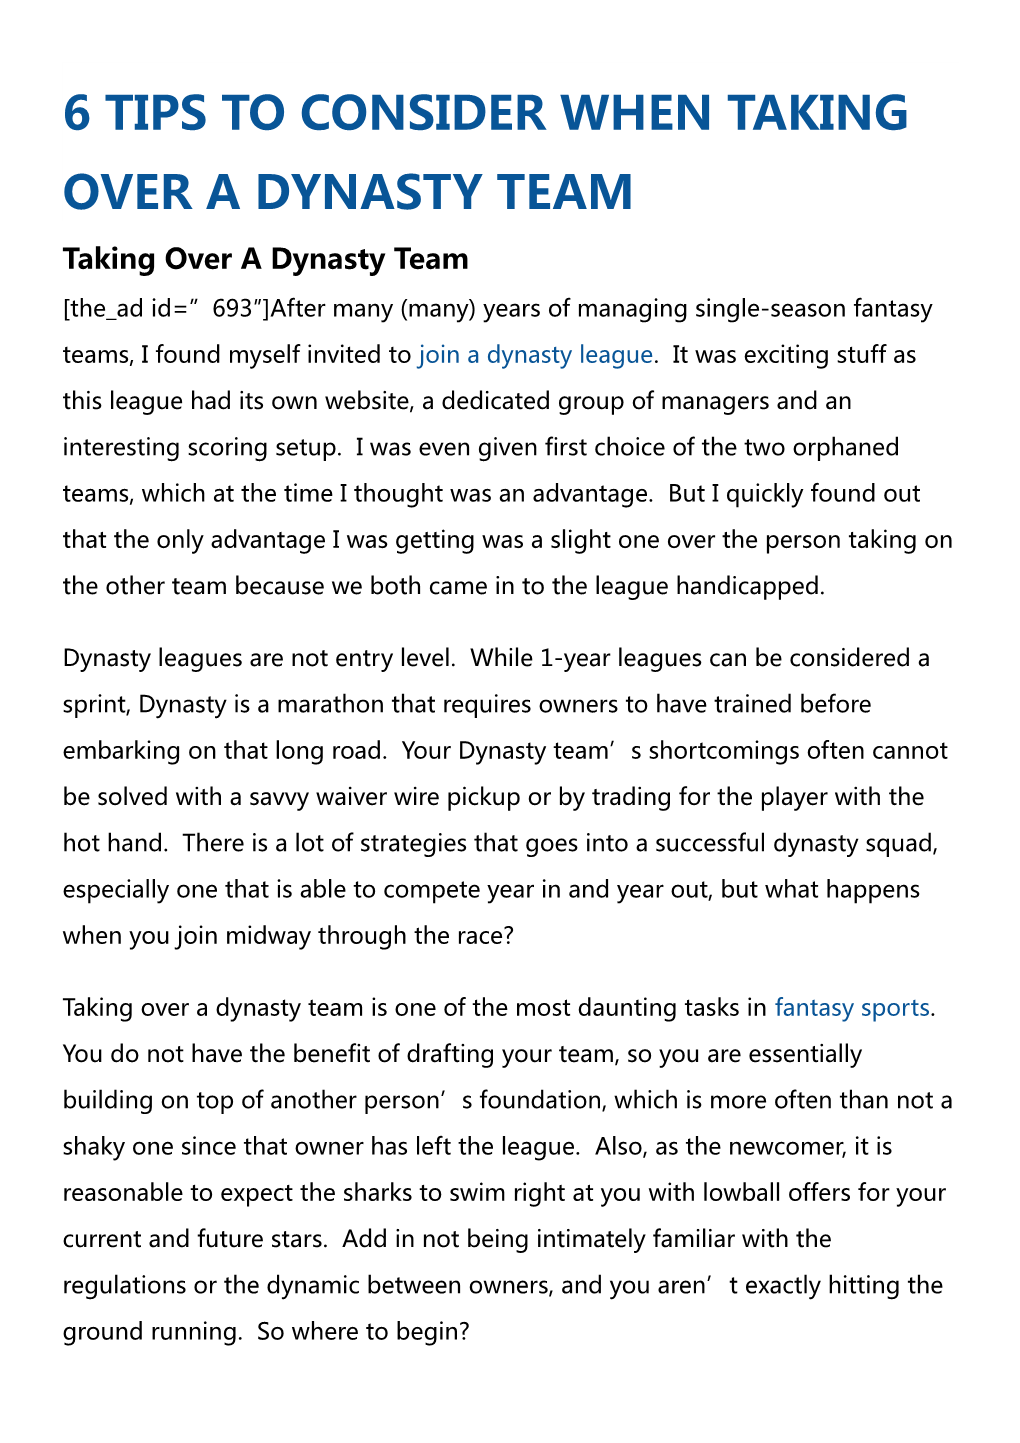 6 Tips to Consider When Taking Over a Dynasty Team